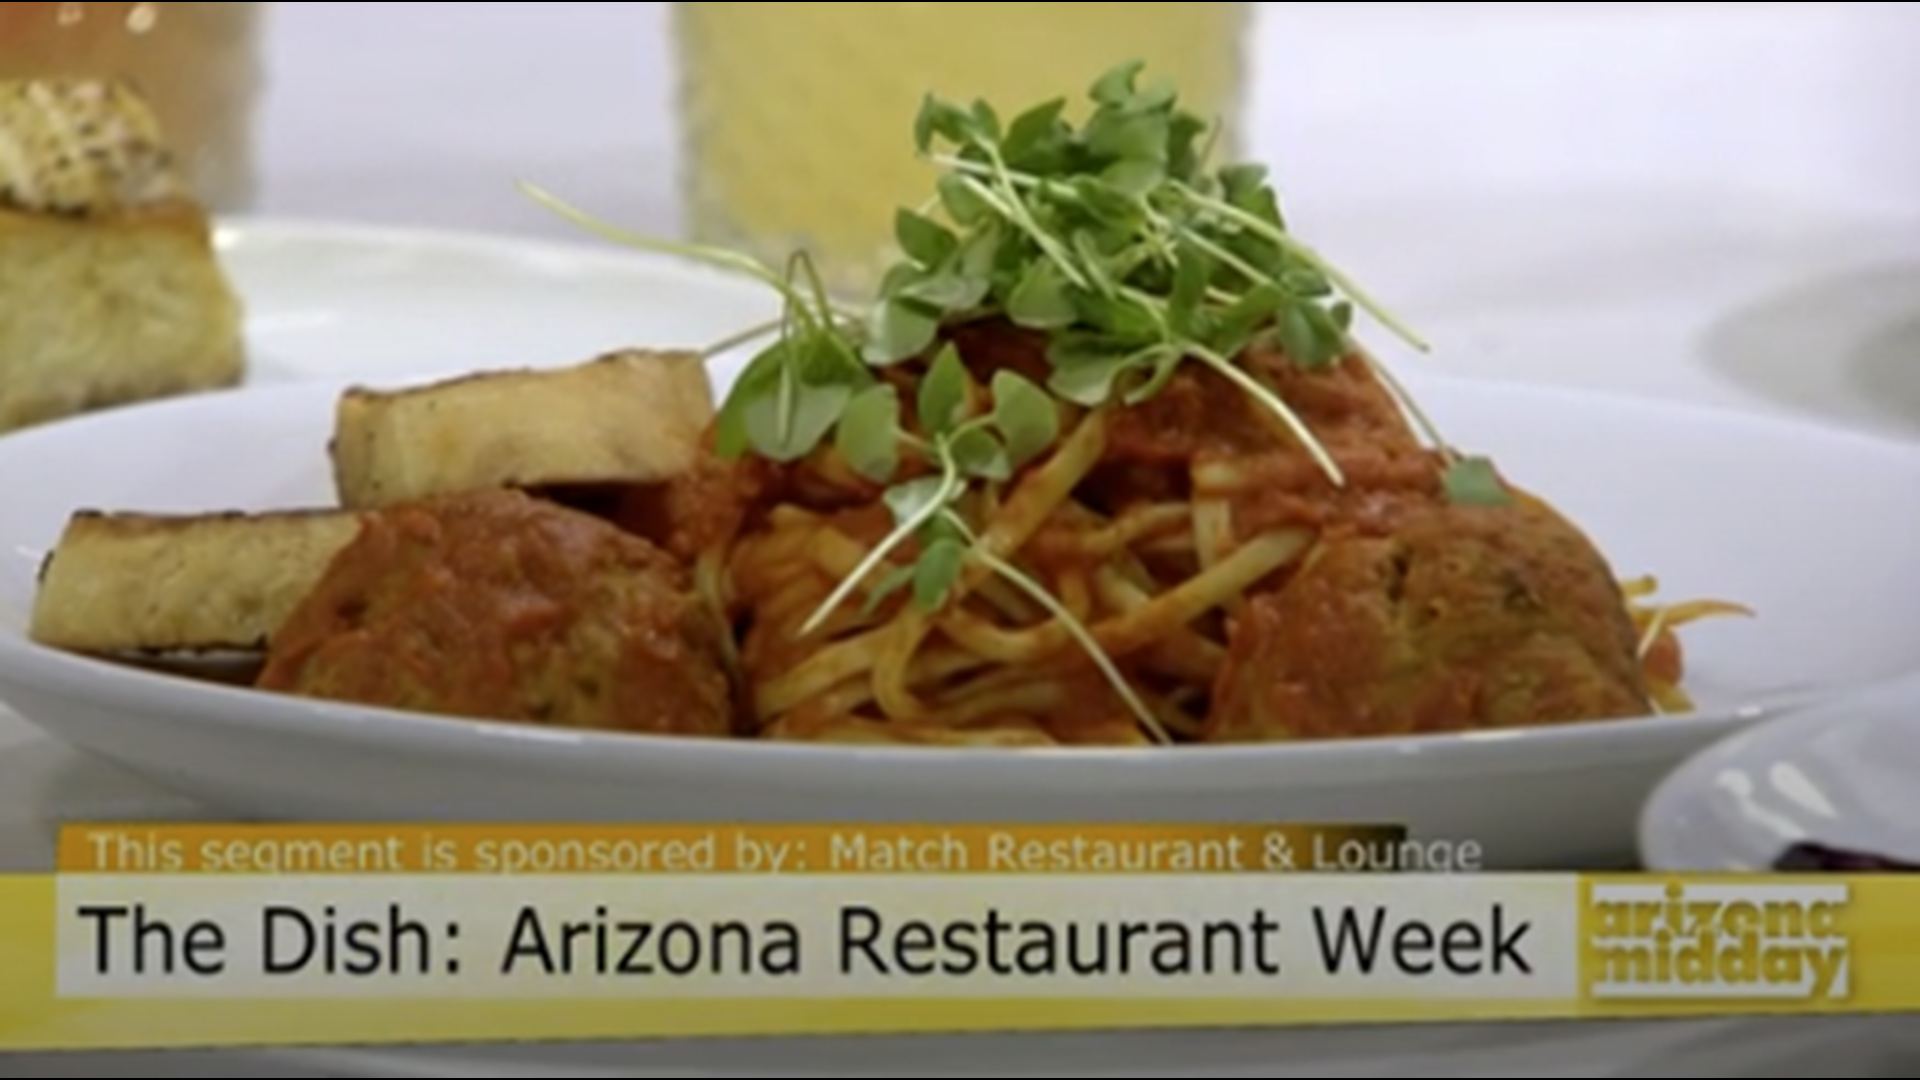 MATCH Restaurant & Lounge in Phoenix is participating in Arizona Restaurant Week. Chef Orlando Parker cooks up some of the savory dishes that we can expect to see on the menu.